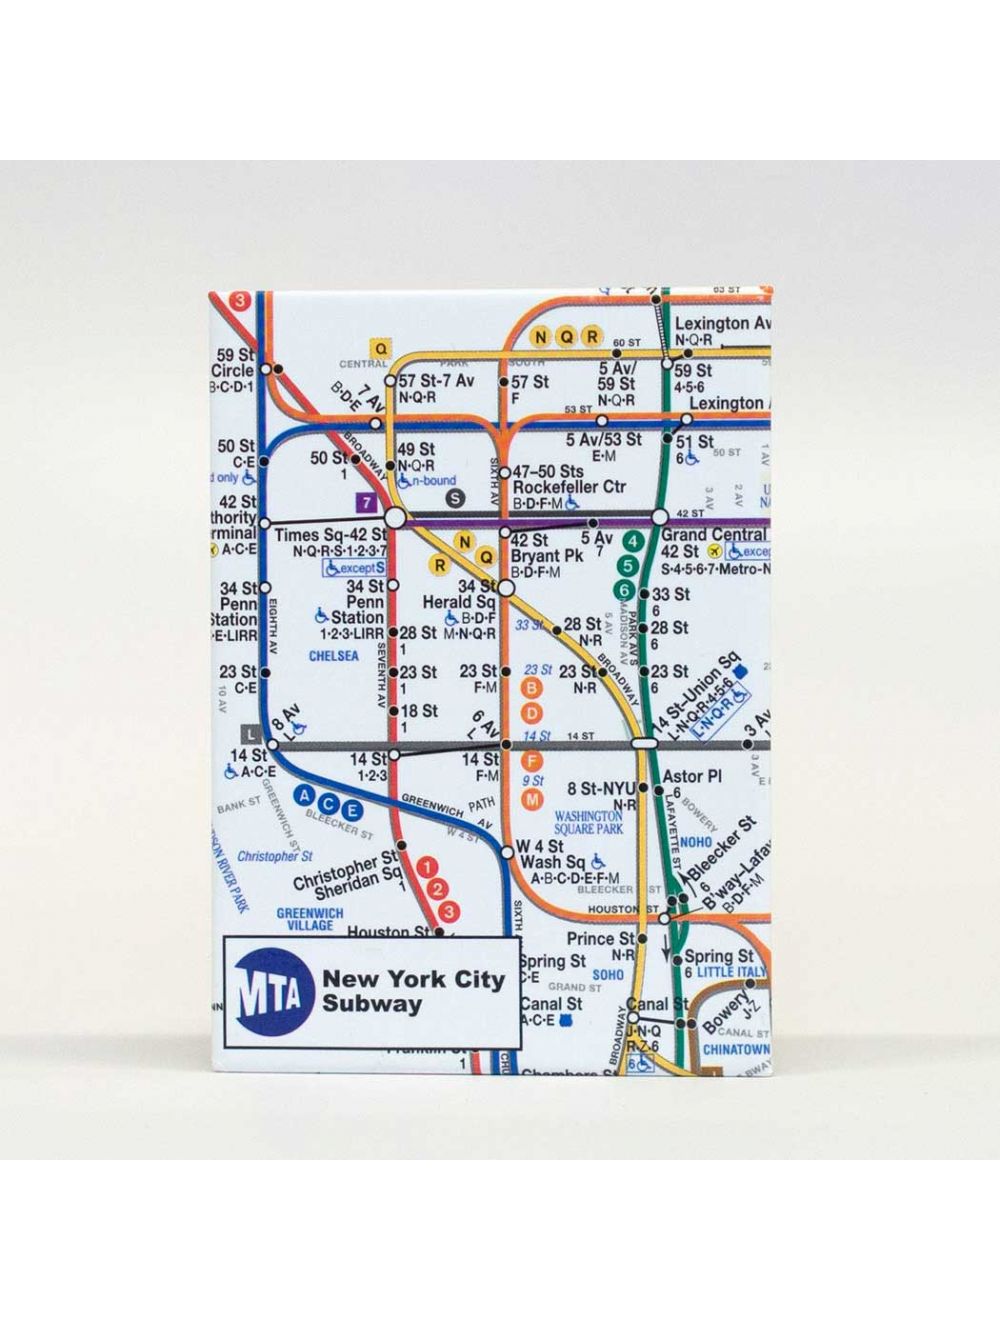 Little Italy NYC Subway Magnet New York City MTA Station Souvenir Gift 